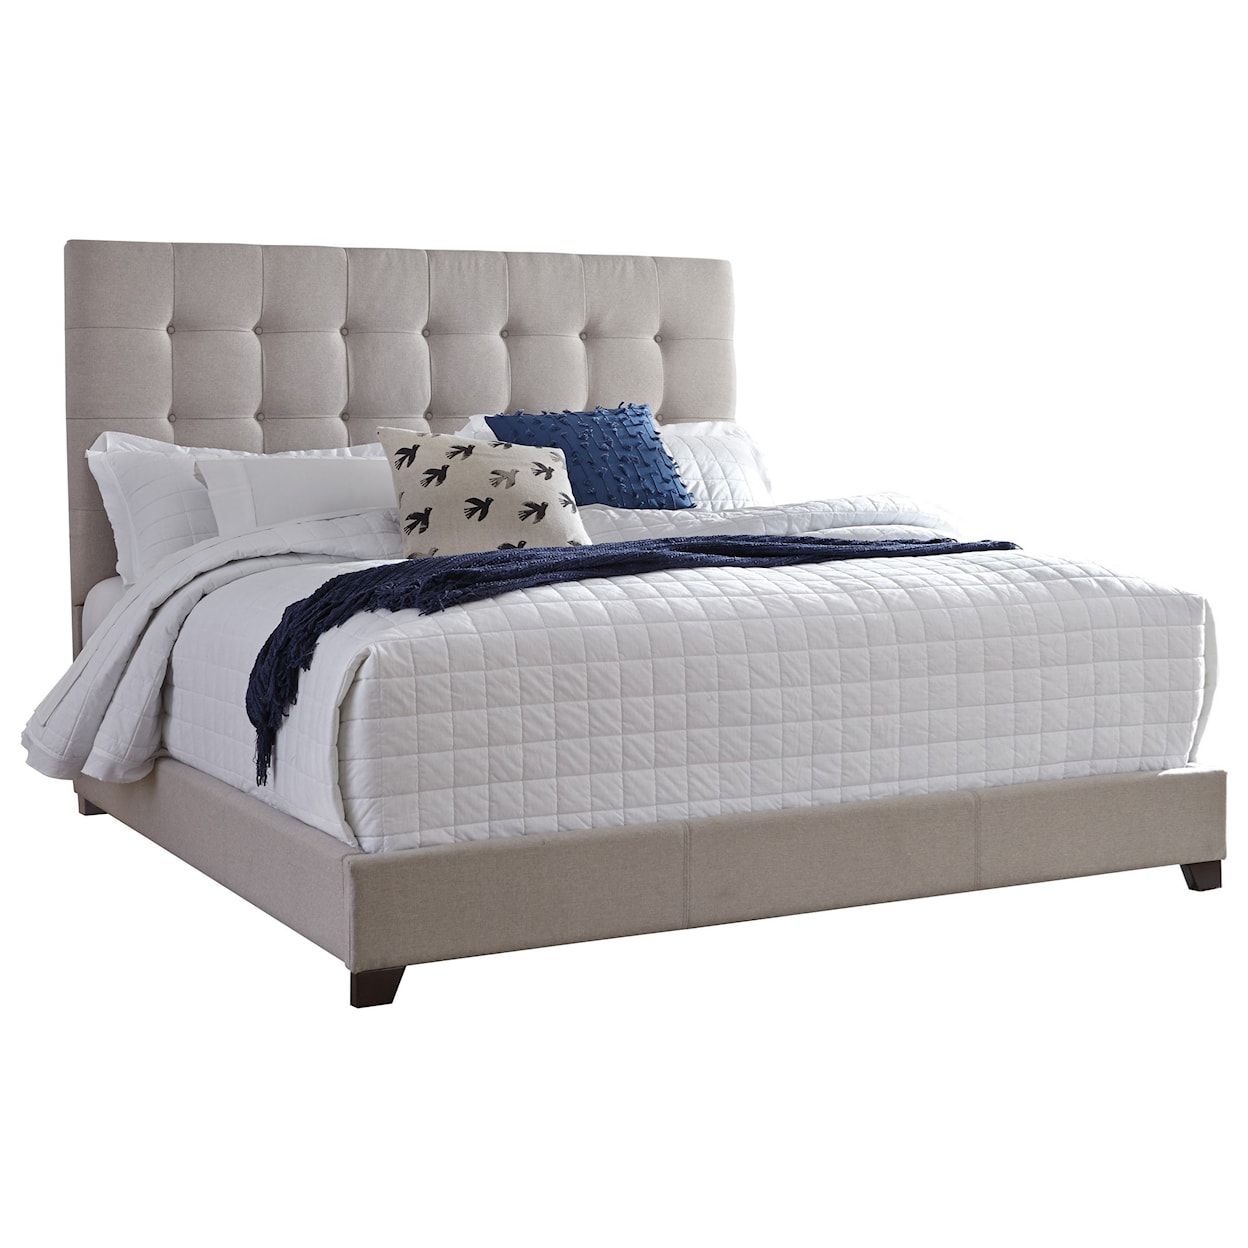 Signature Design by Ashley Dolante Queen Upholstered Bed